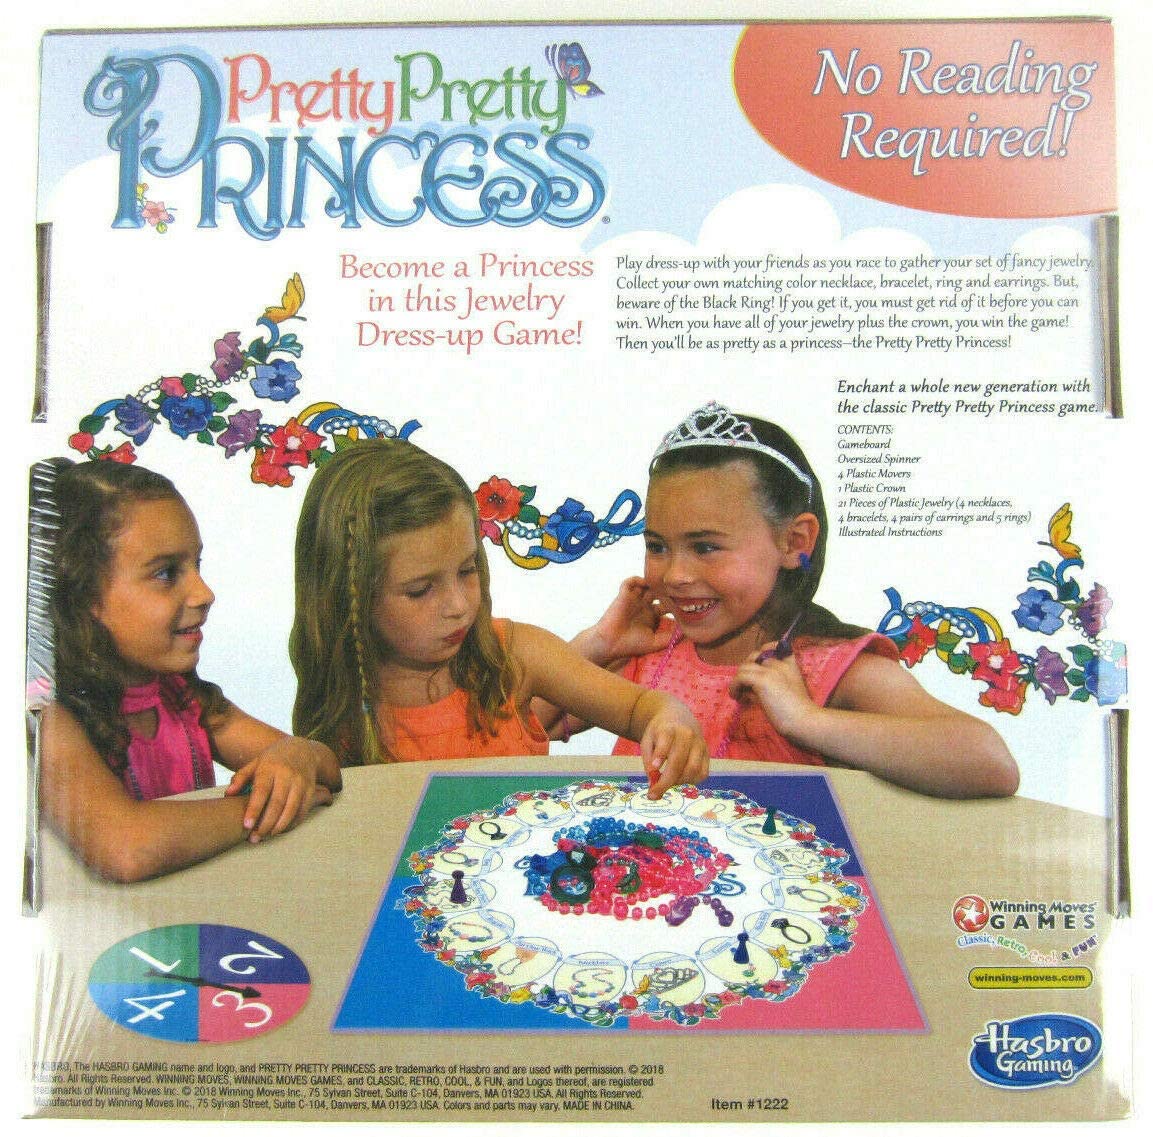 Pretty Pretty Princess Game Jewelry Dress Up Board Game 1990's Classic Toy Tiara Necklaces - image 2 of 6